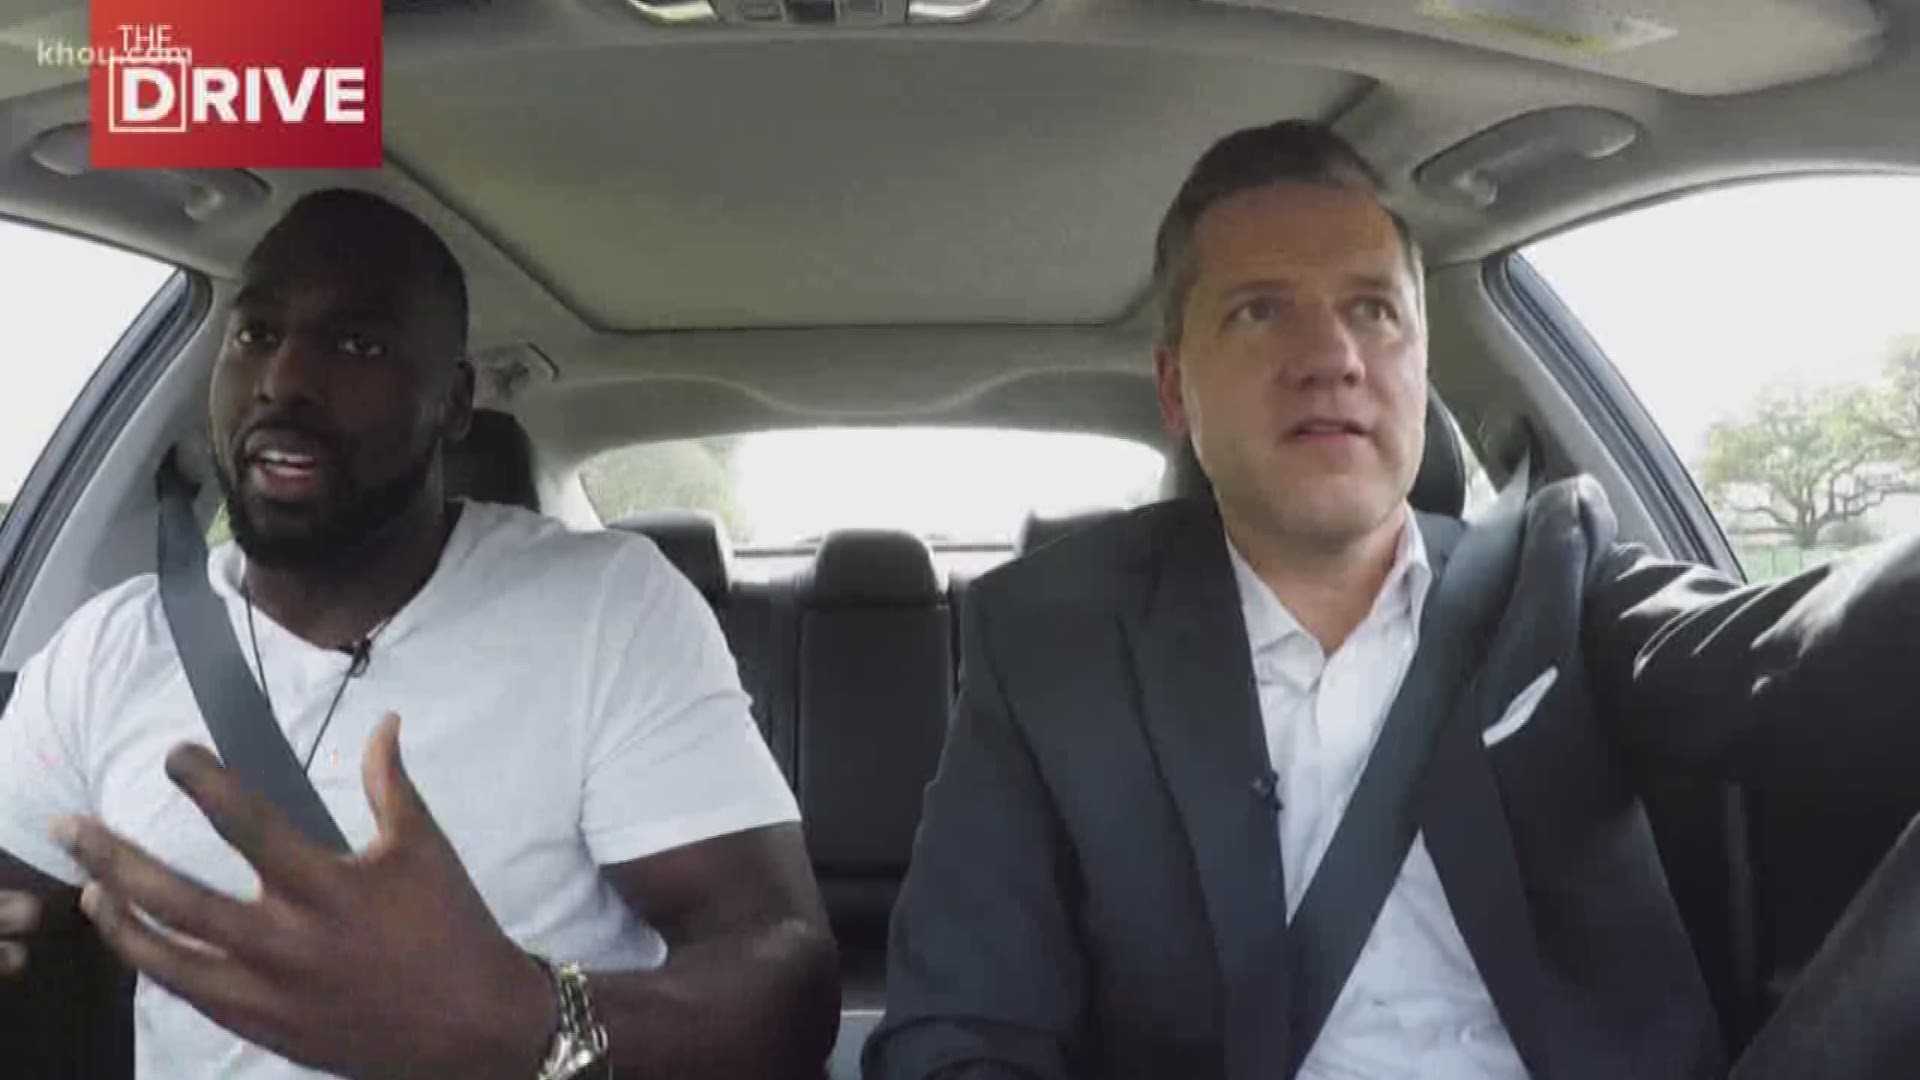 KHOU 11 Sports' Jason Bristol takes a drive with Houston Texans linebacker Whitney Mercilus to talk all things Texans, Fortnite and his foundation.